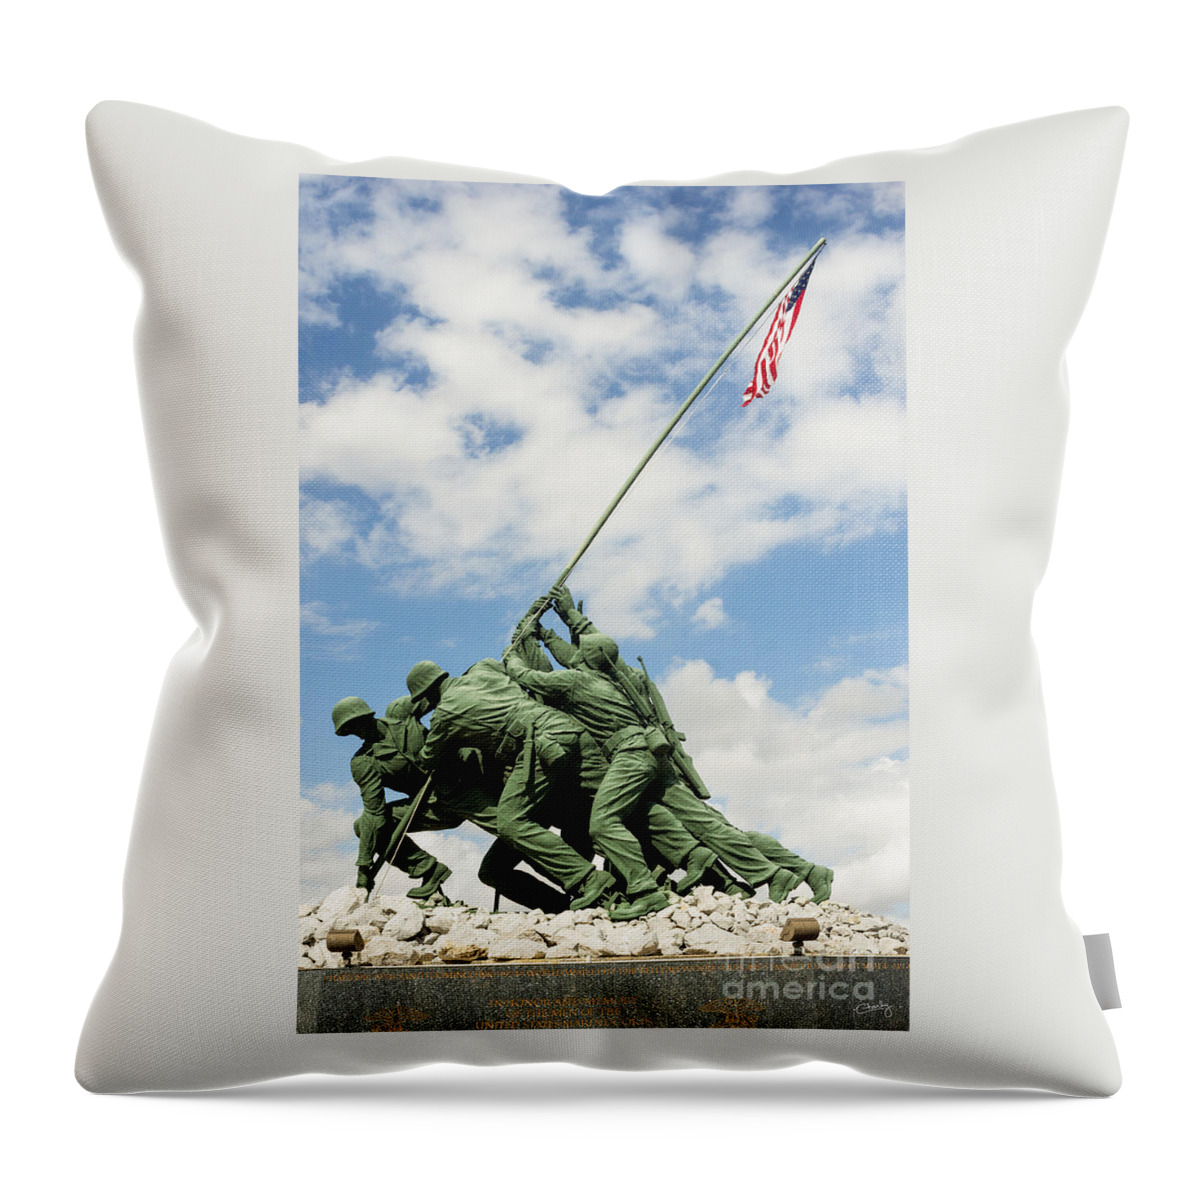 Iwo Jima Monument Throw Pillow featuring the photograph Iwo Jima Monument II by Imagery by Charly